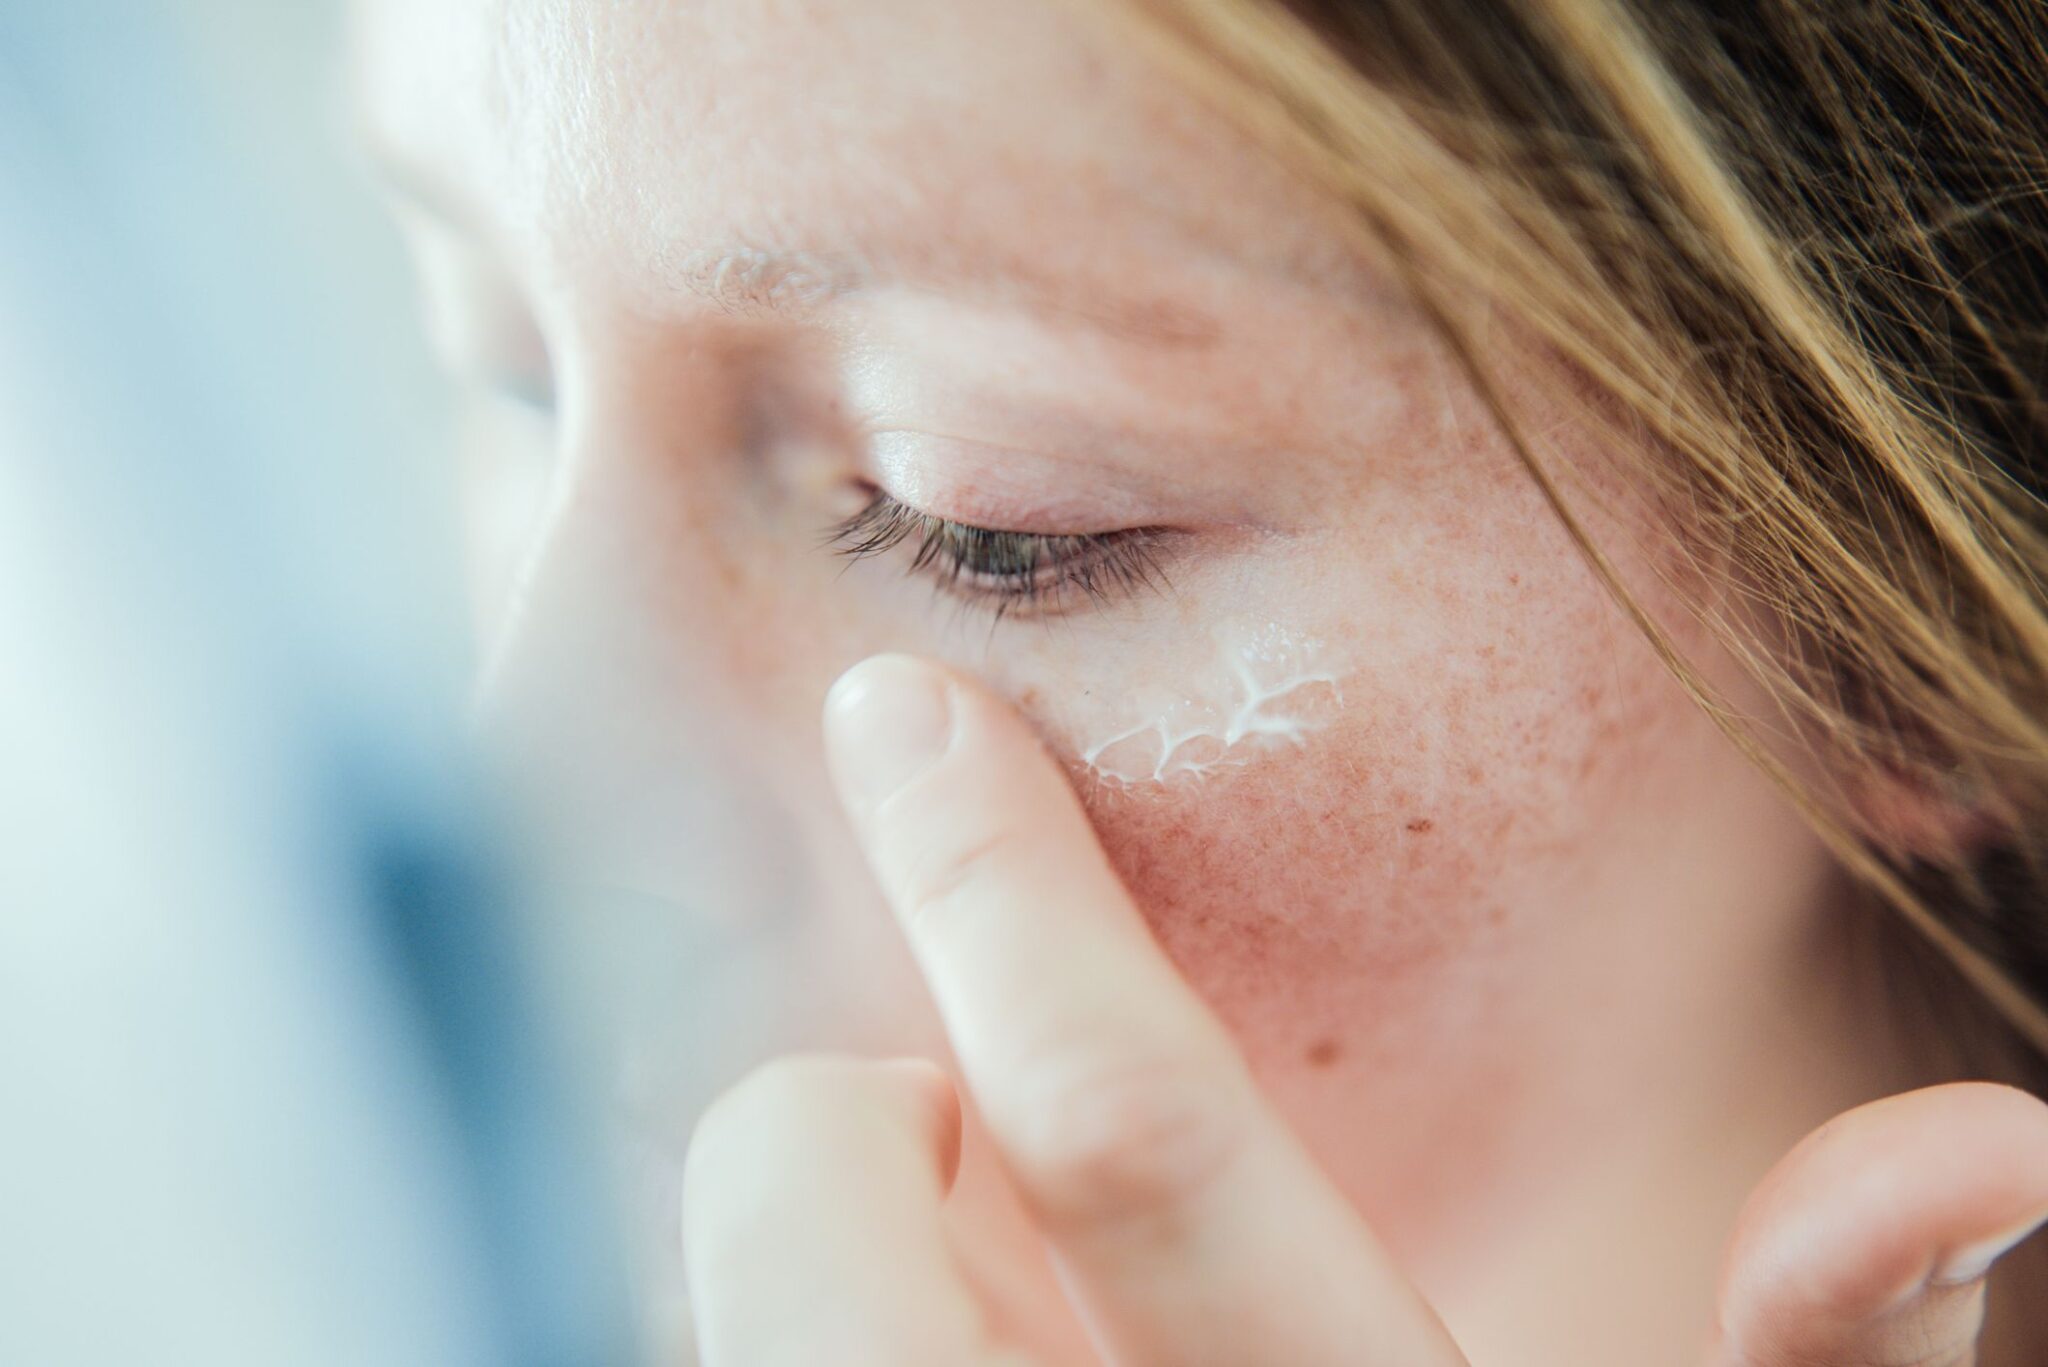 Scabs On Face Meaning Symptoms Causes And Getting Rid Of Them Fast